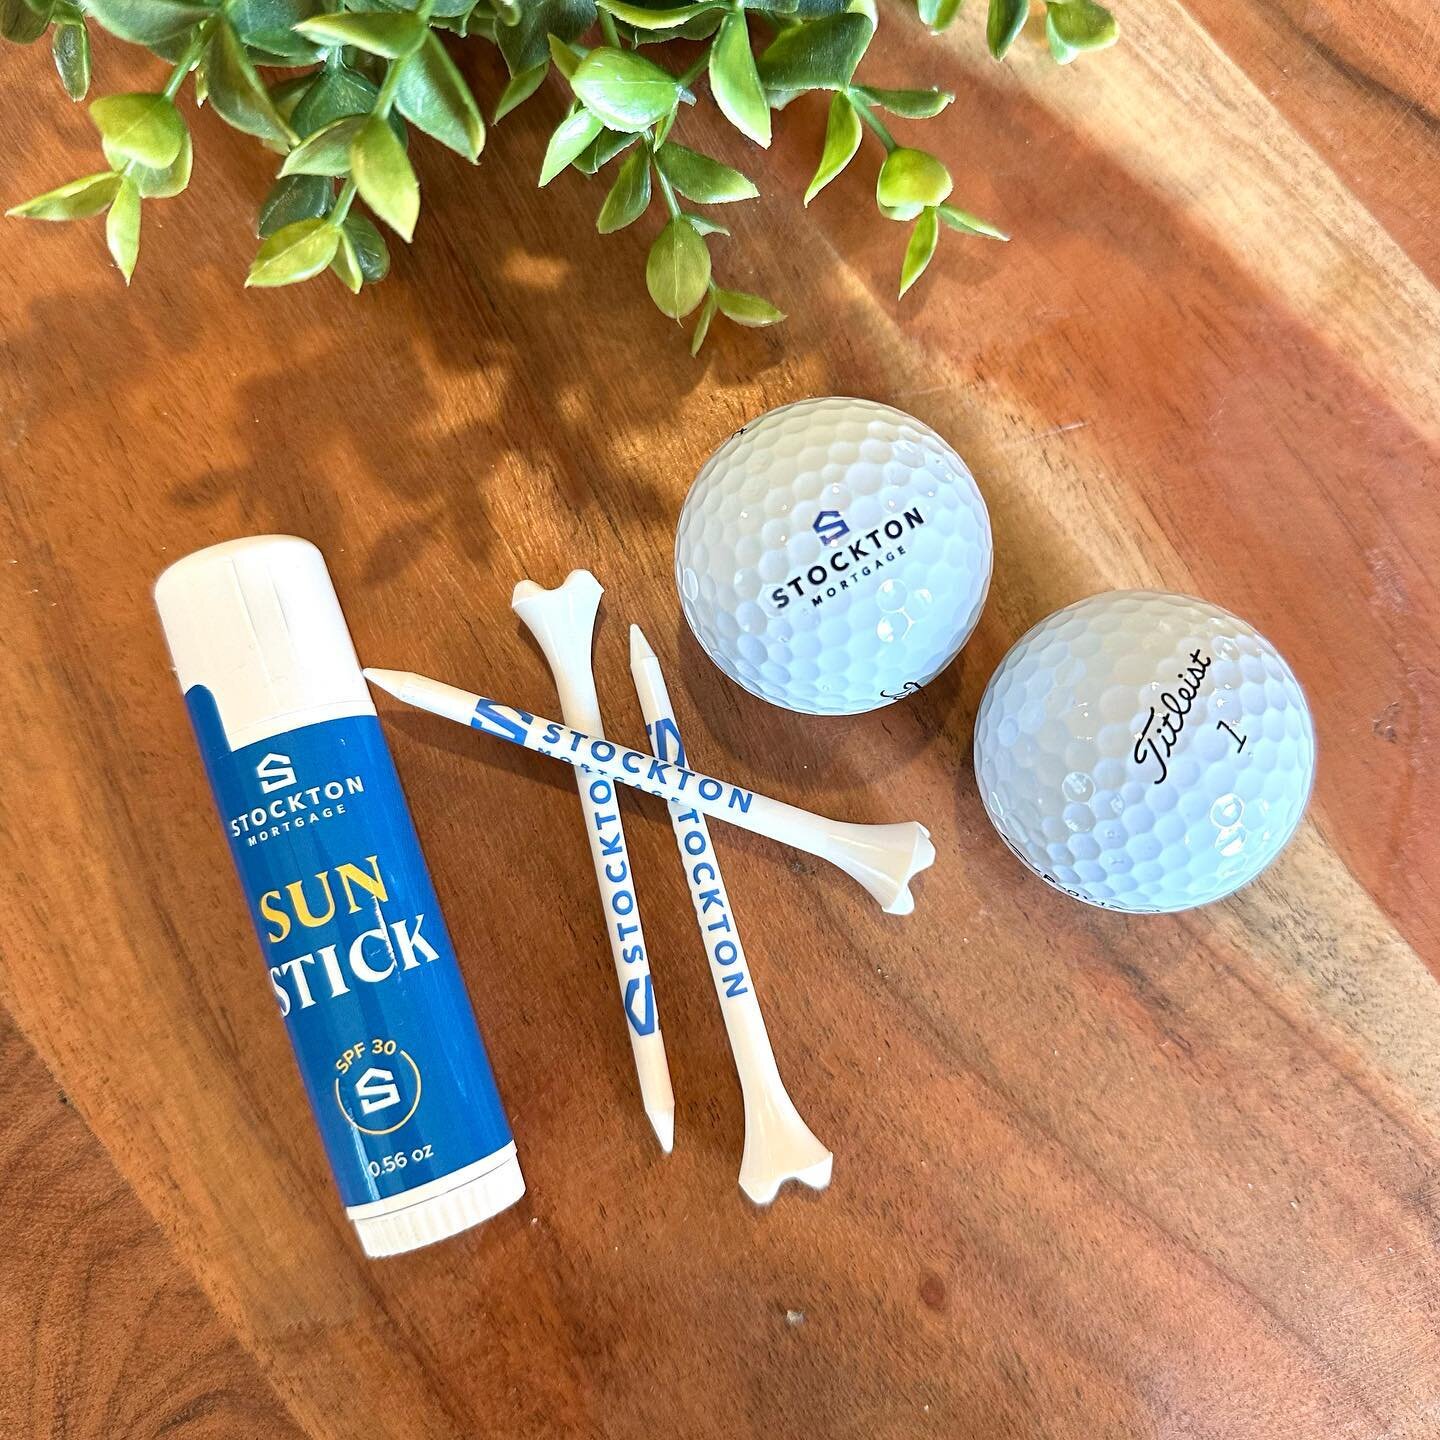 Golf season is here and our friends at @stockton.mortgage have the essentials! ⛳️
&bull;
&bull;
&bull;
&bull;
&bull;
#golflife #promotionalproducts #merchandise #merch #promoitems #golf #customgolfballs #golfball #titleist #lexingtonky #stocktonmortg